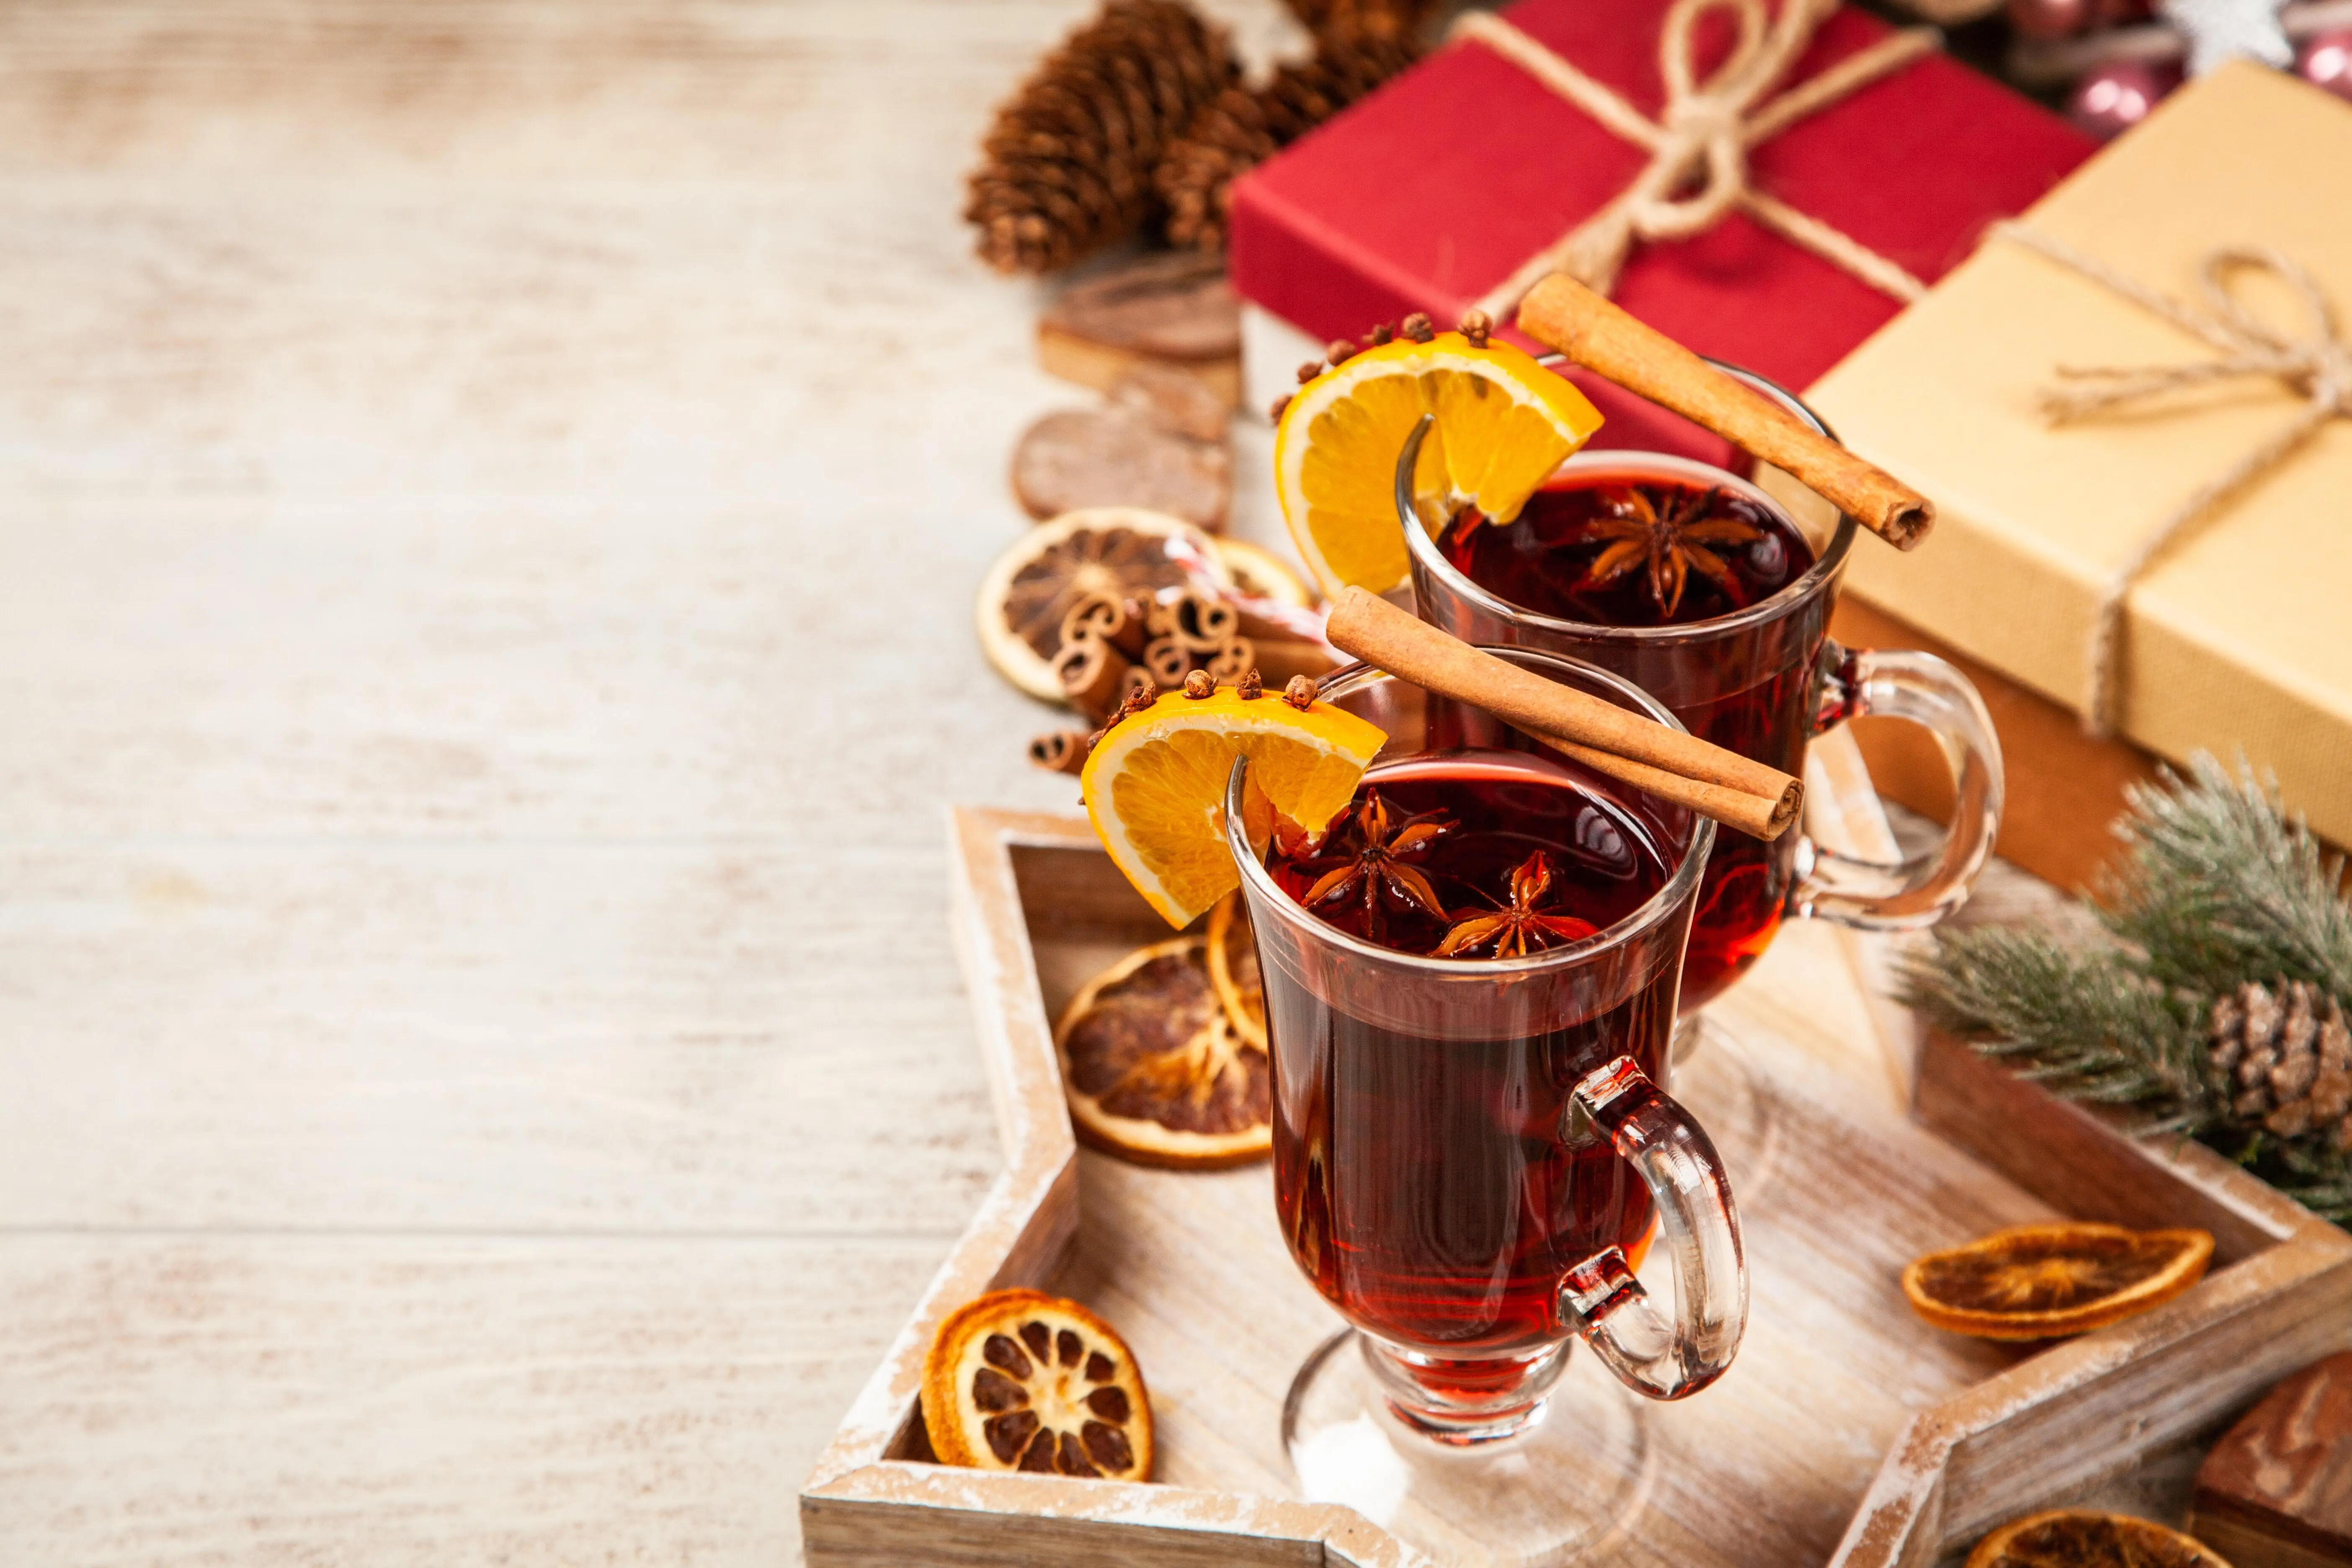 Two clear footed glass mugs on a wooden star-shaped tray. Both mugs are filled with mulled wine that's garnished with a clove-studed orange slice, star anise pods, and a cinnamon stick.